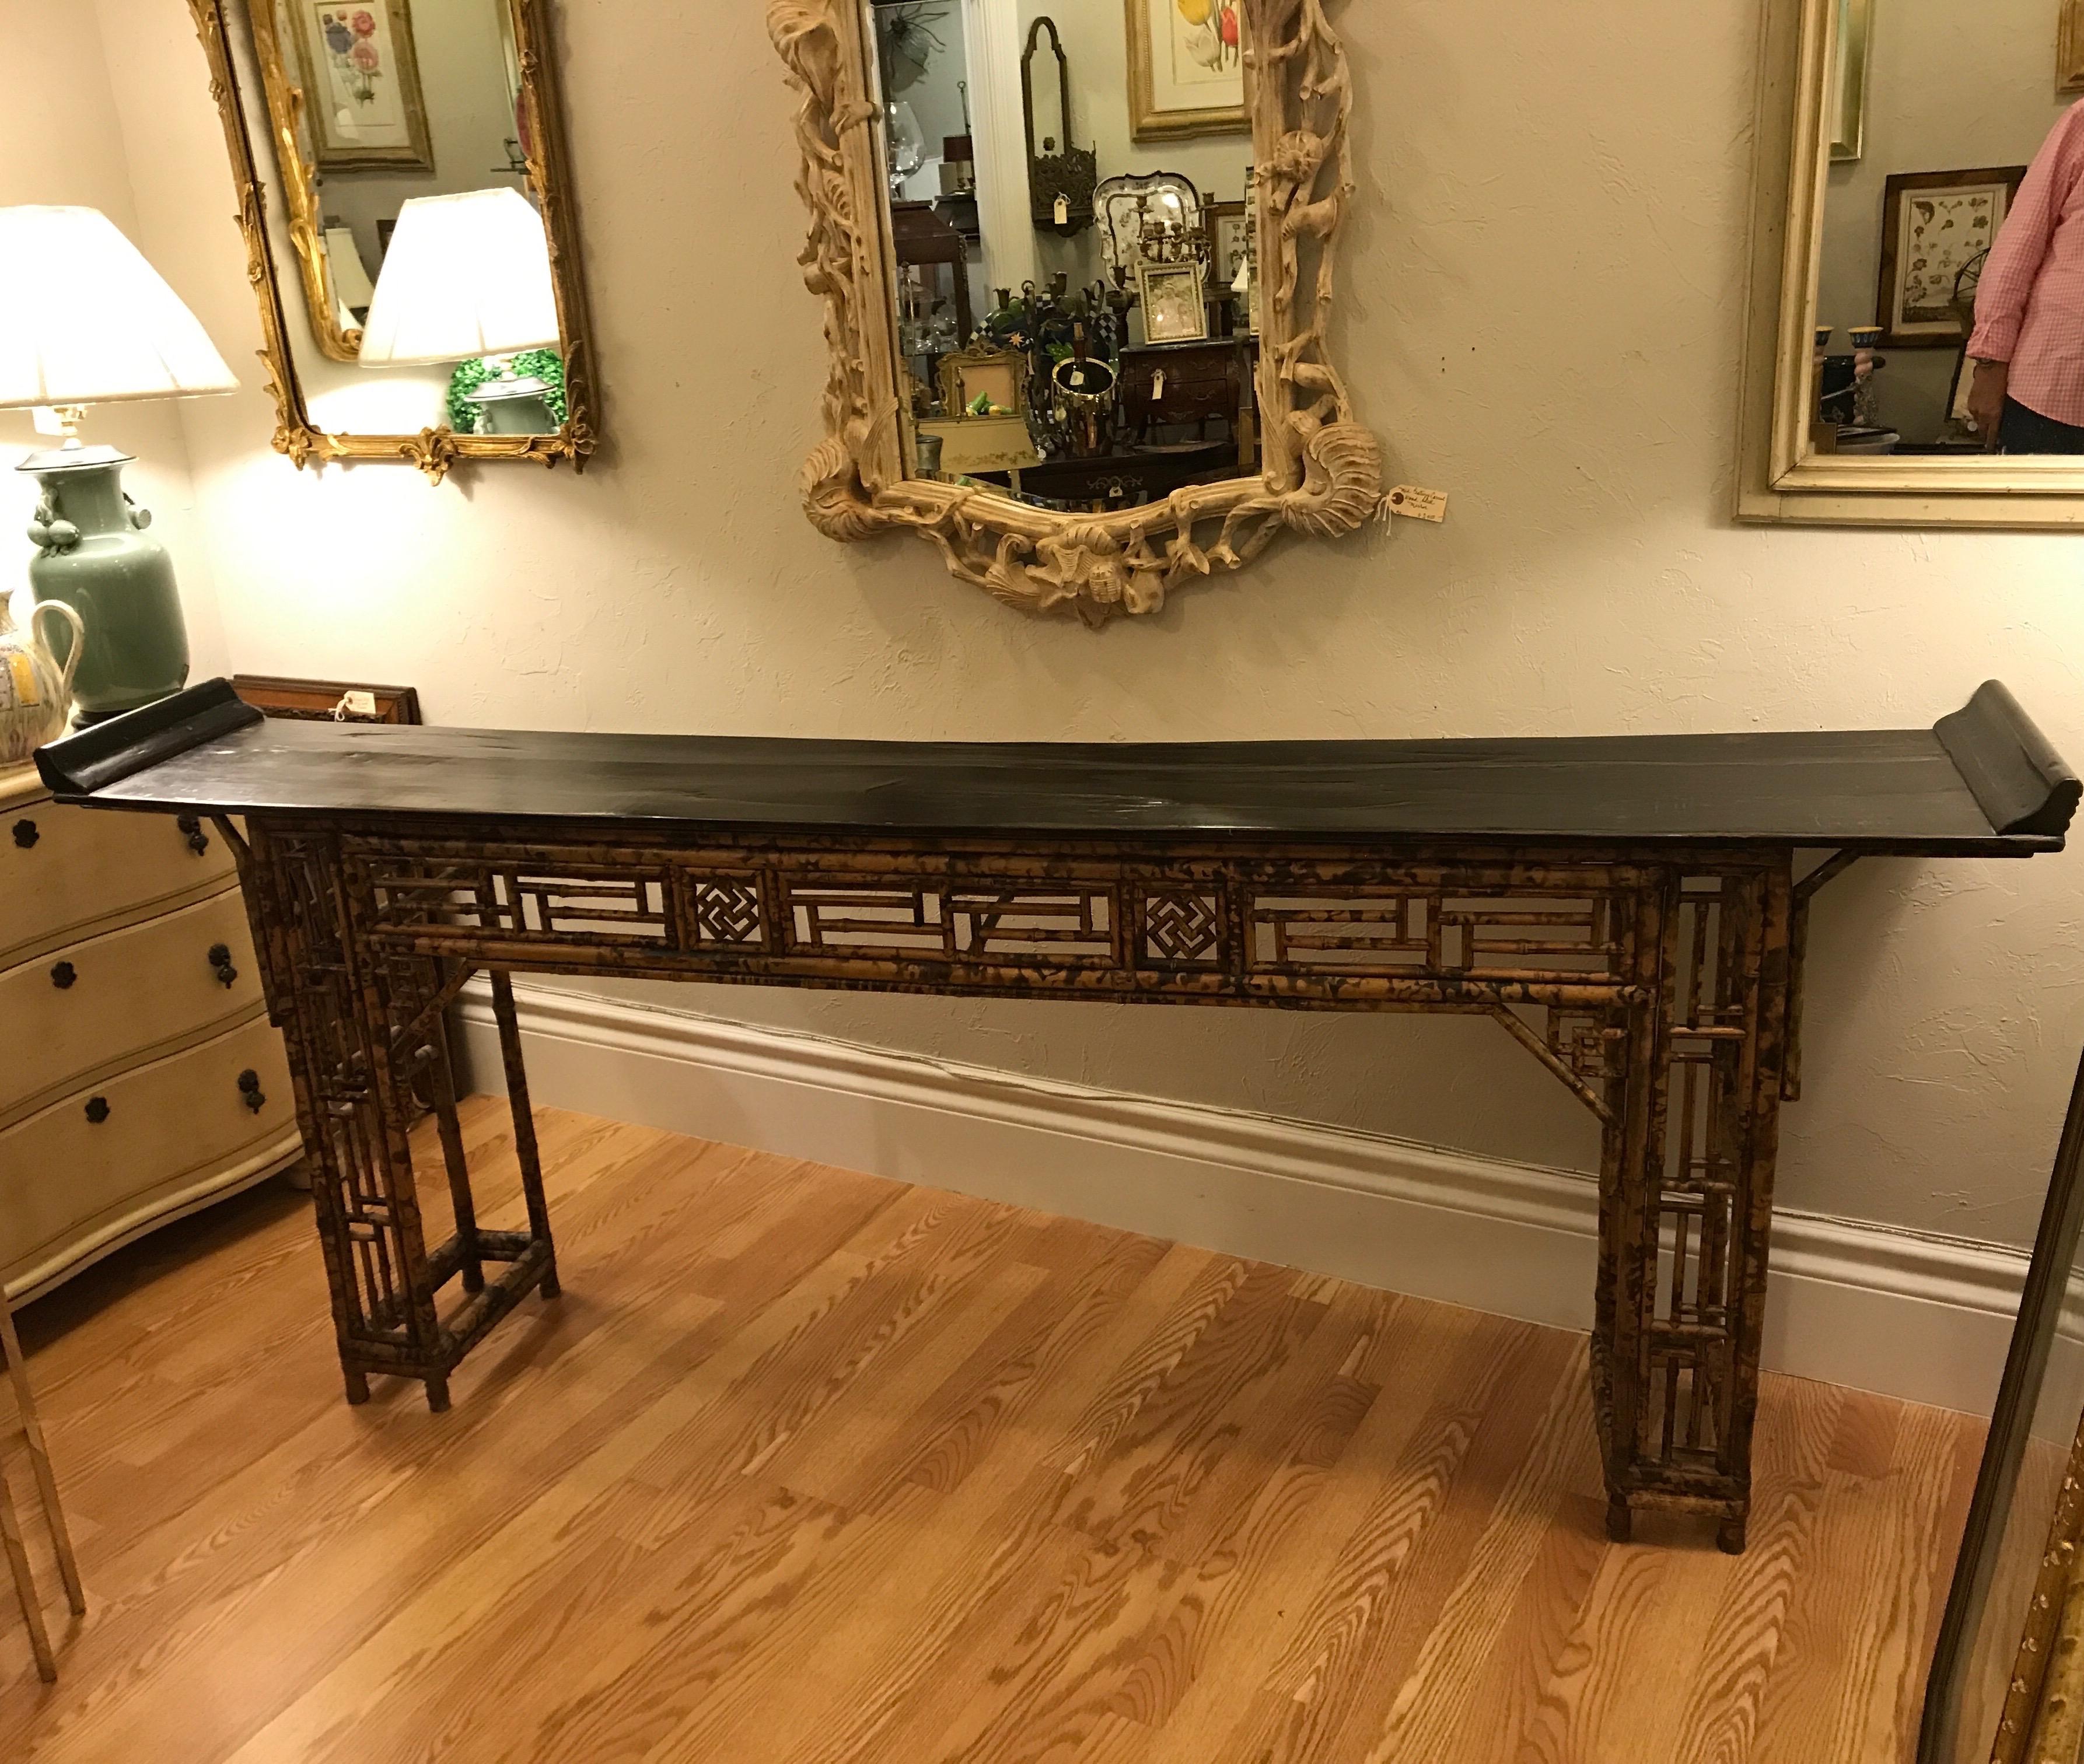 Antique Chinese bamboo altar table with everted ends. Open lattice pedestal bases. Narrow depth makes it ideal for an entry table, sofa table or sideboard.